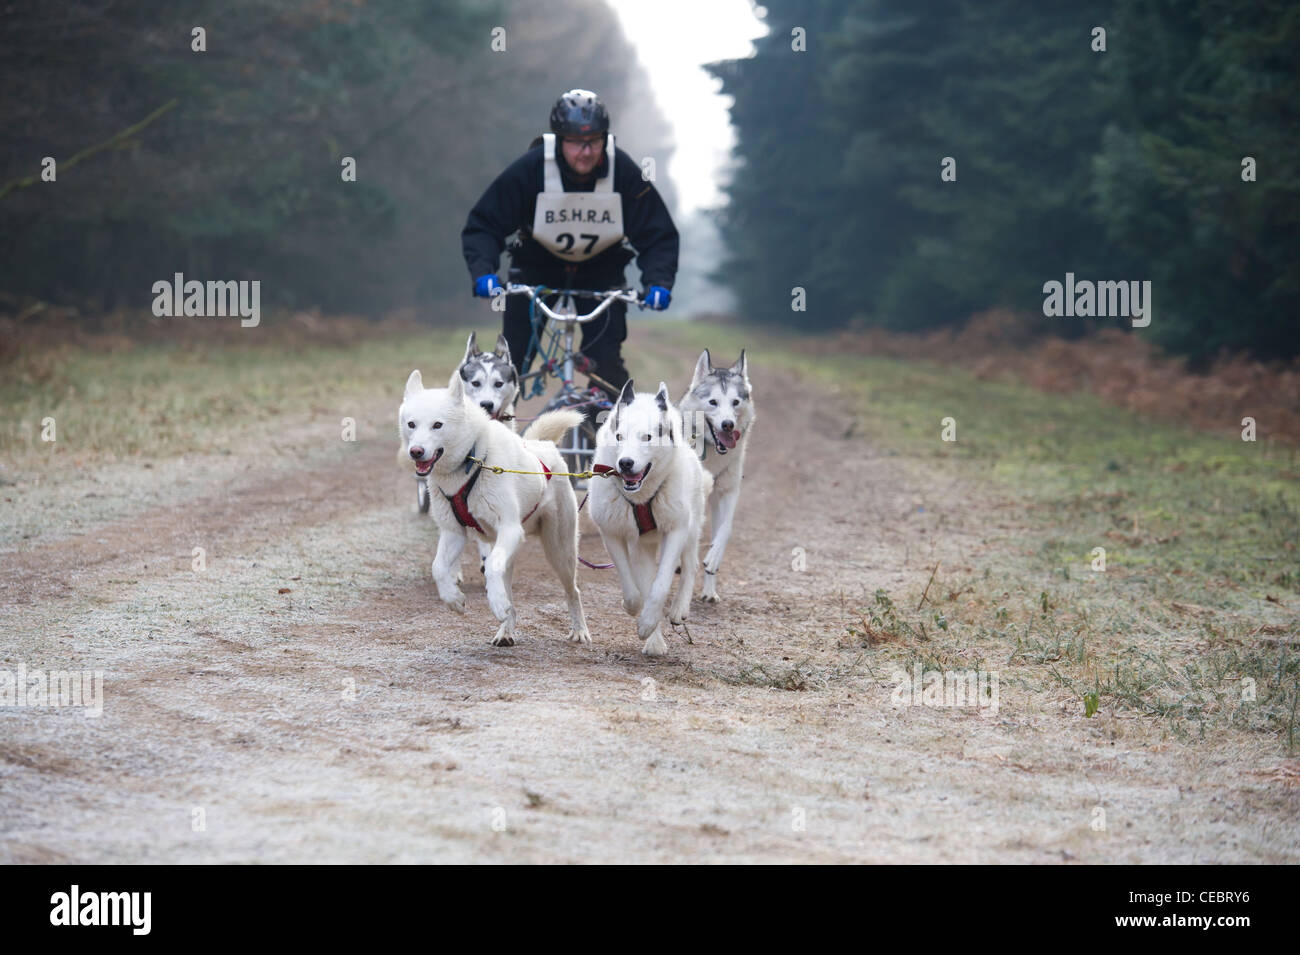 British Siberian Husky Racing Association event held at Elveden Forest, Suffolk, UK. Four dog teams competing on a timed lap. Stock Photo